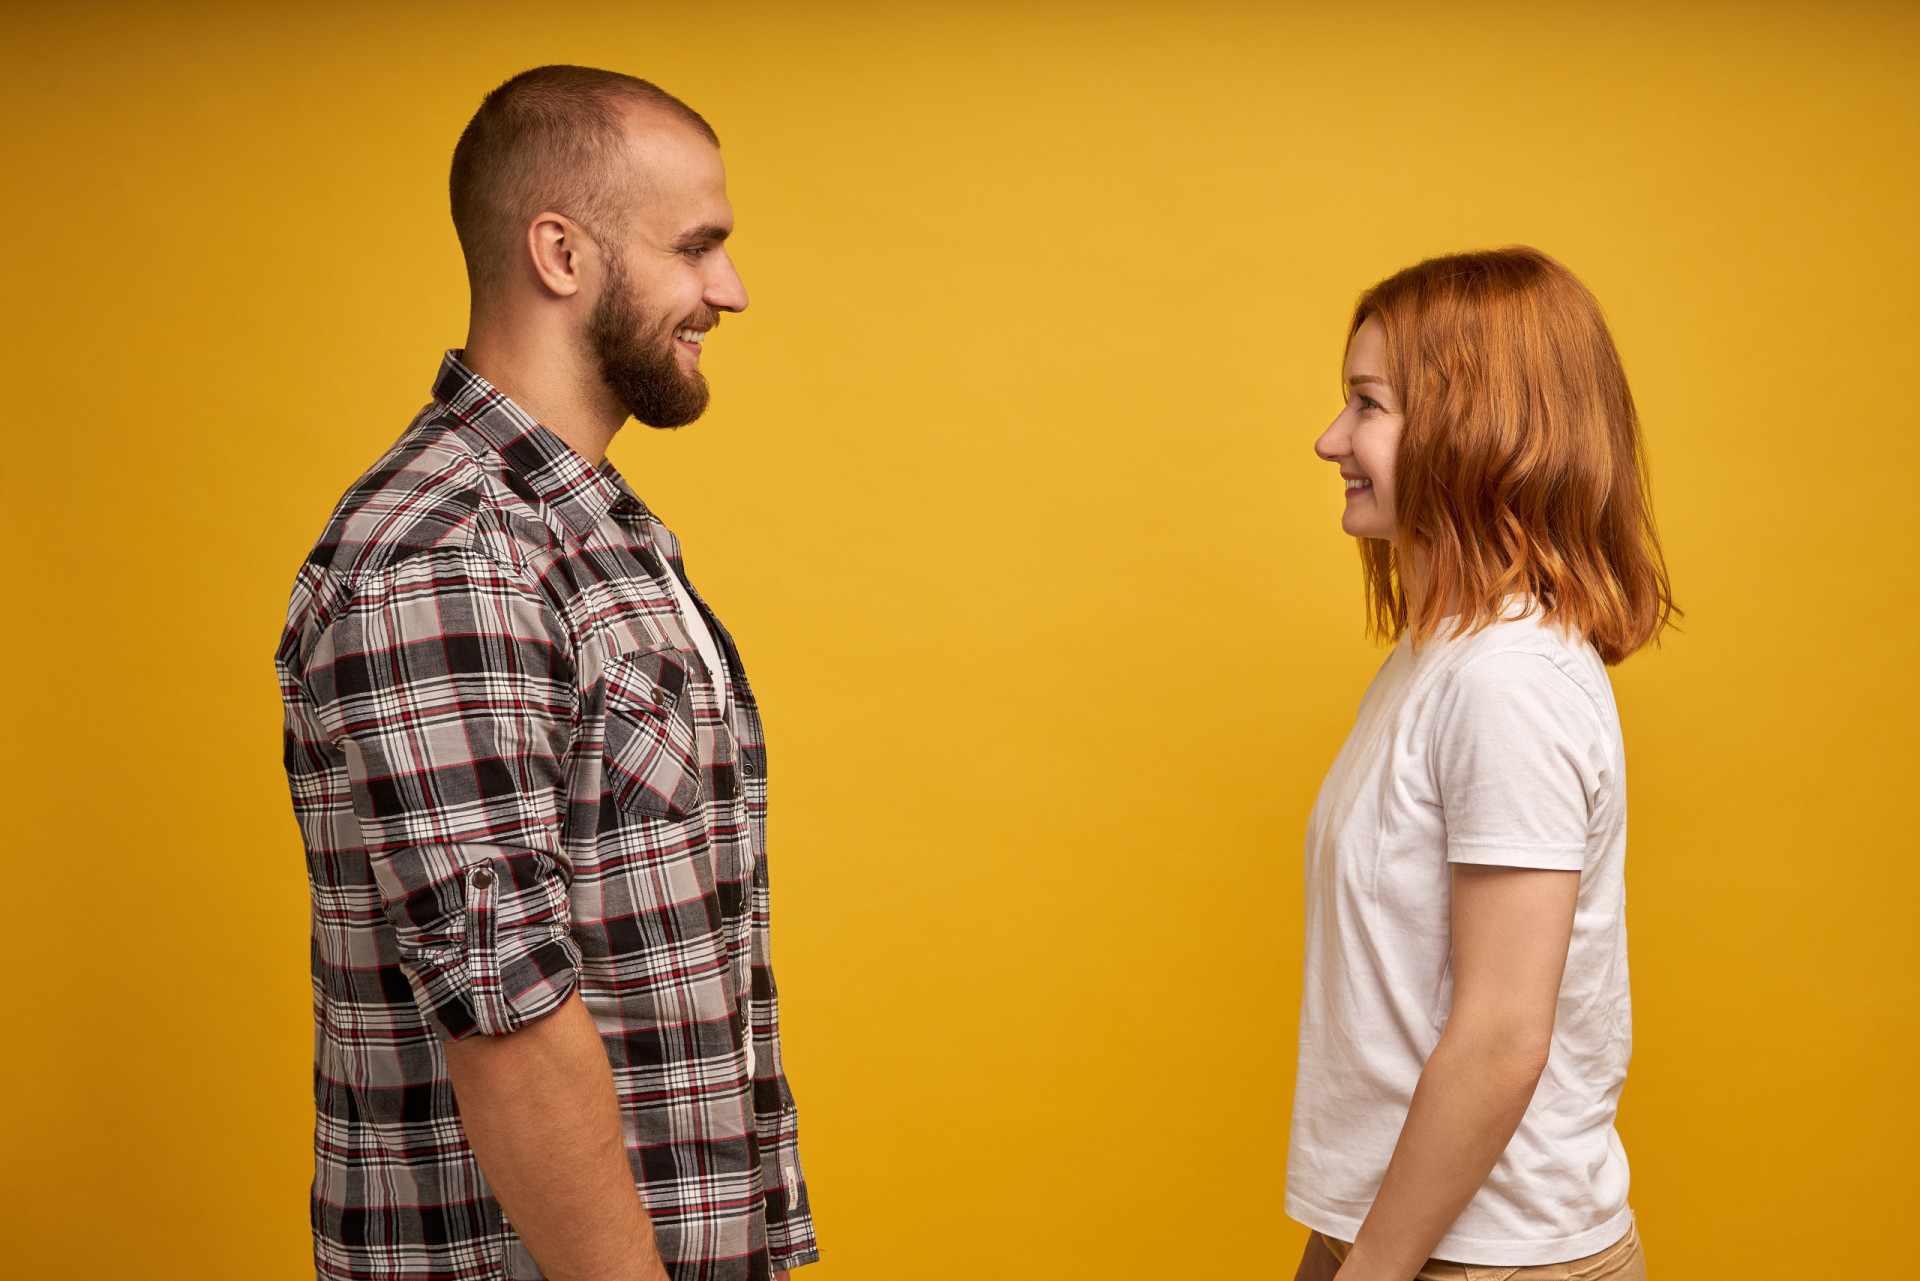 <p><span>Another important element of communication is eye contact. Meeting the gaze of your conversation partner will make them feel like you are fully engaged with what they’re saying.</span></p><p><a href="https://www.msn.com/en-us/community/channel/vid-7xx8mnucu55yw63we9va2gwr7uihbxwc68fxqp25x6tg4ftibpra?cvid=94631541bc0f4f89bfd59158d696ad7e">Follow us and access great exclusive content every day</a></p>